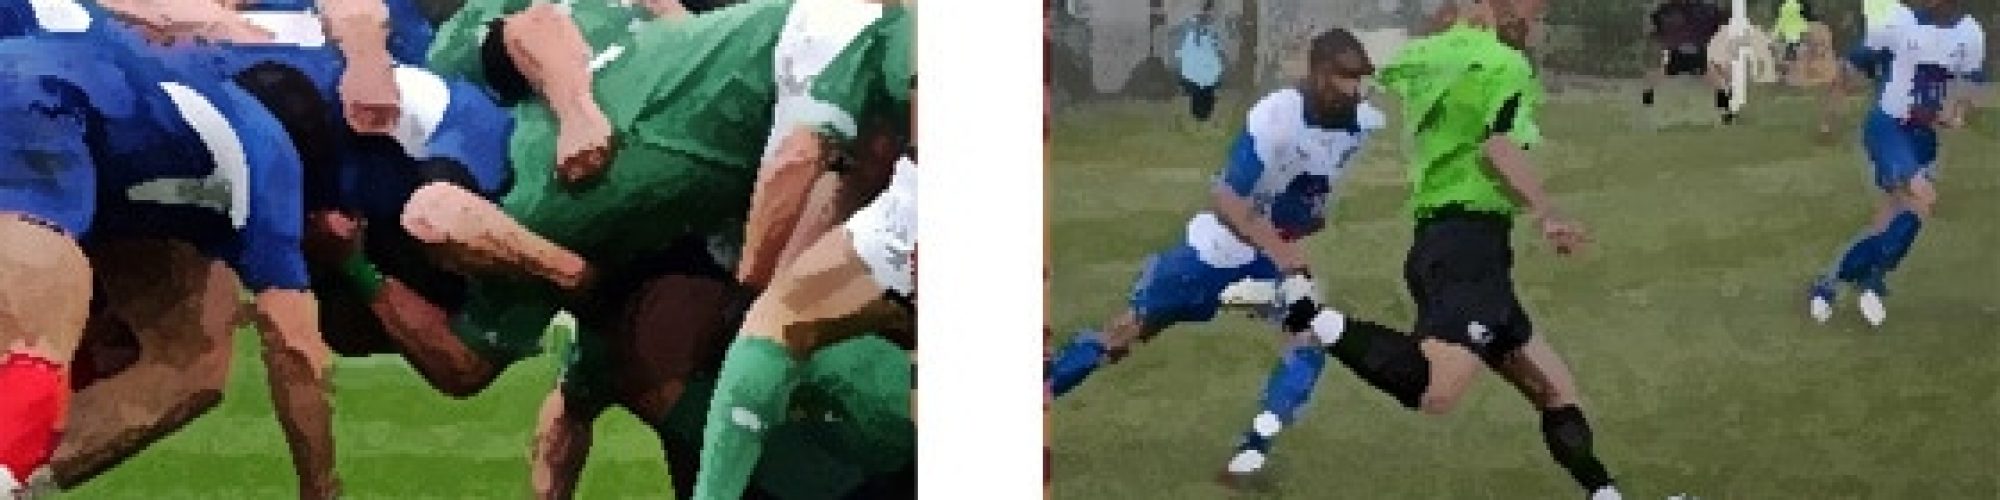 rugby_foot